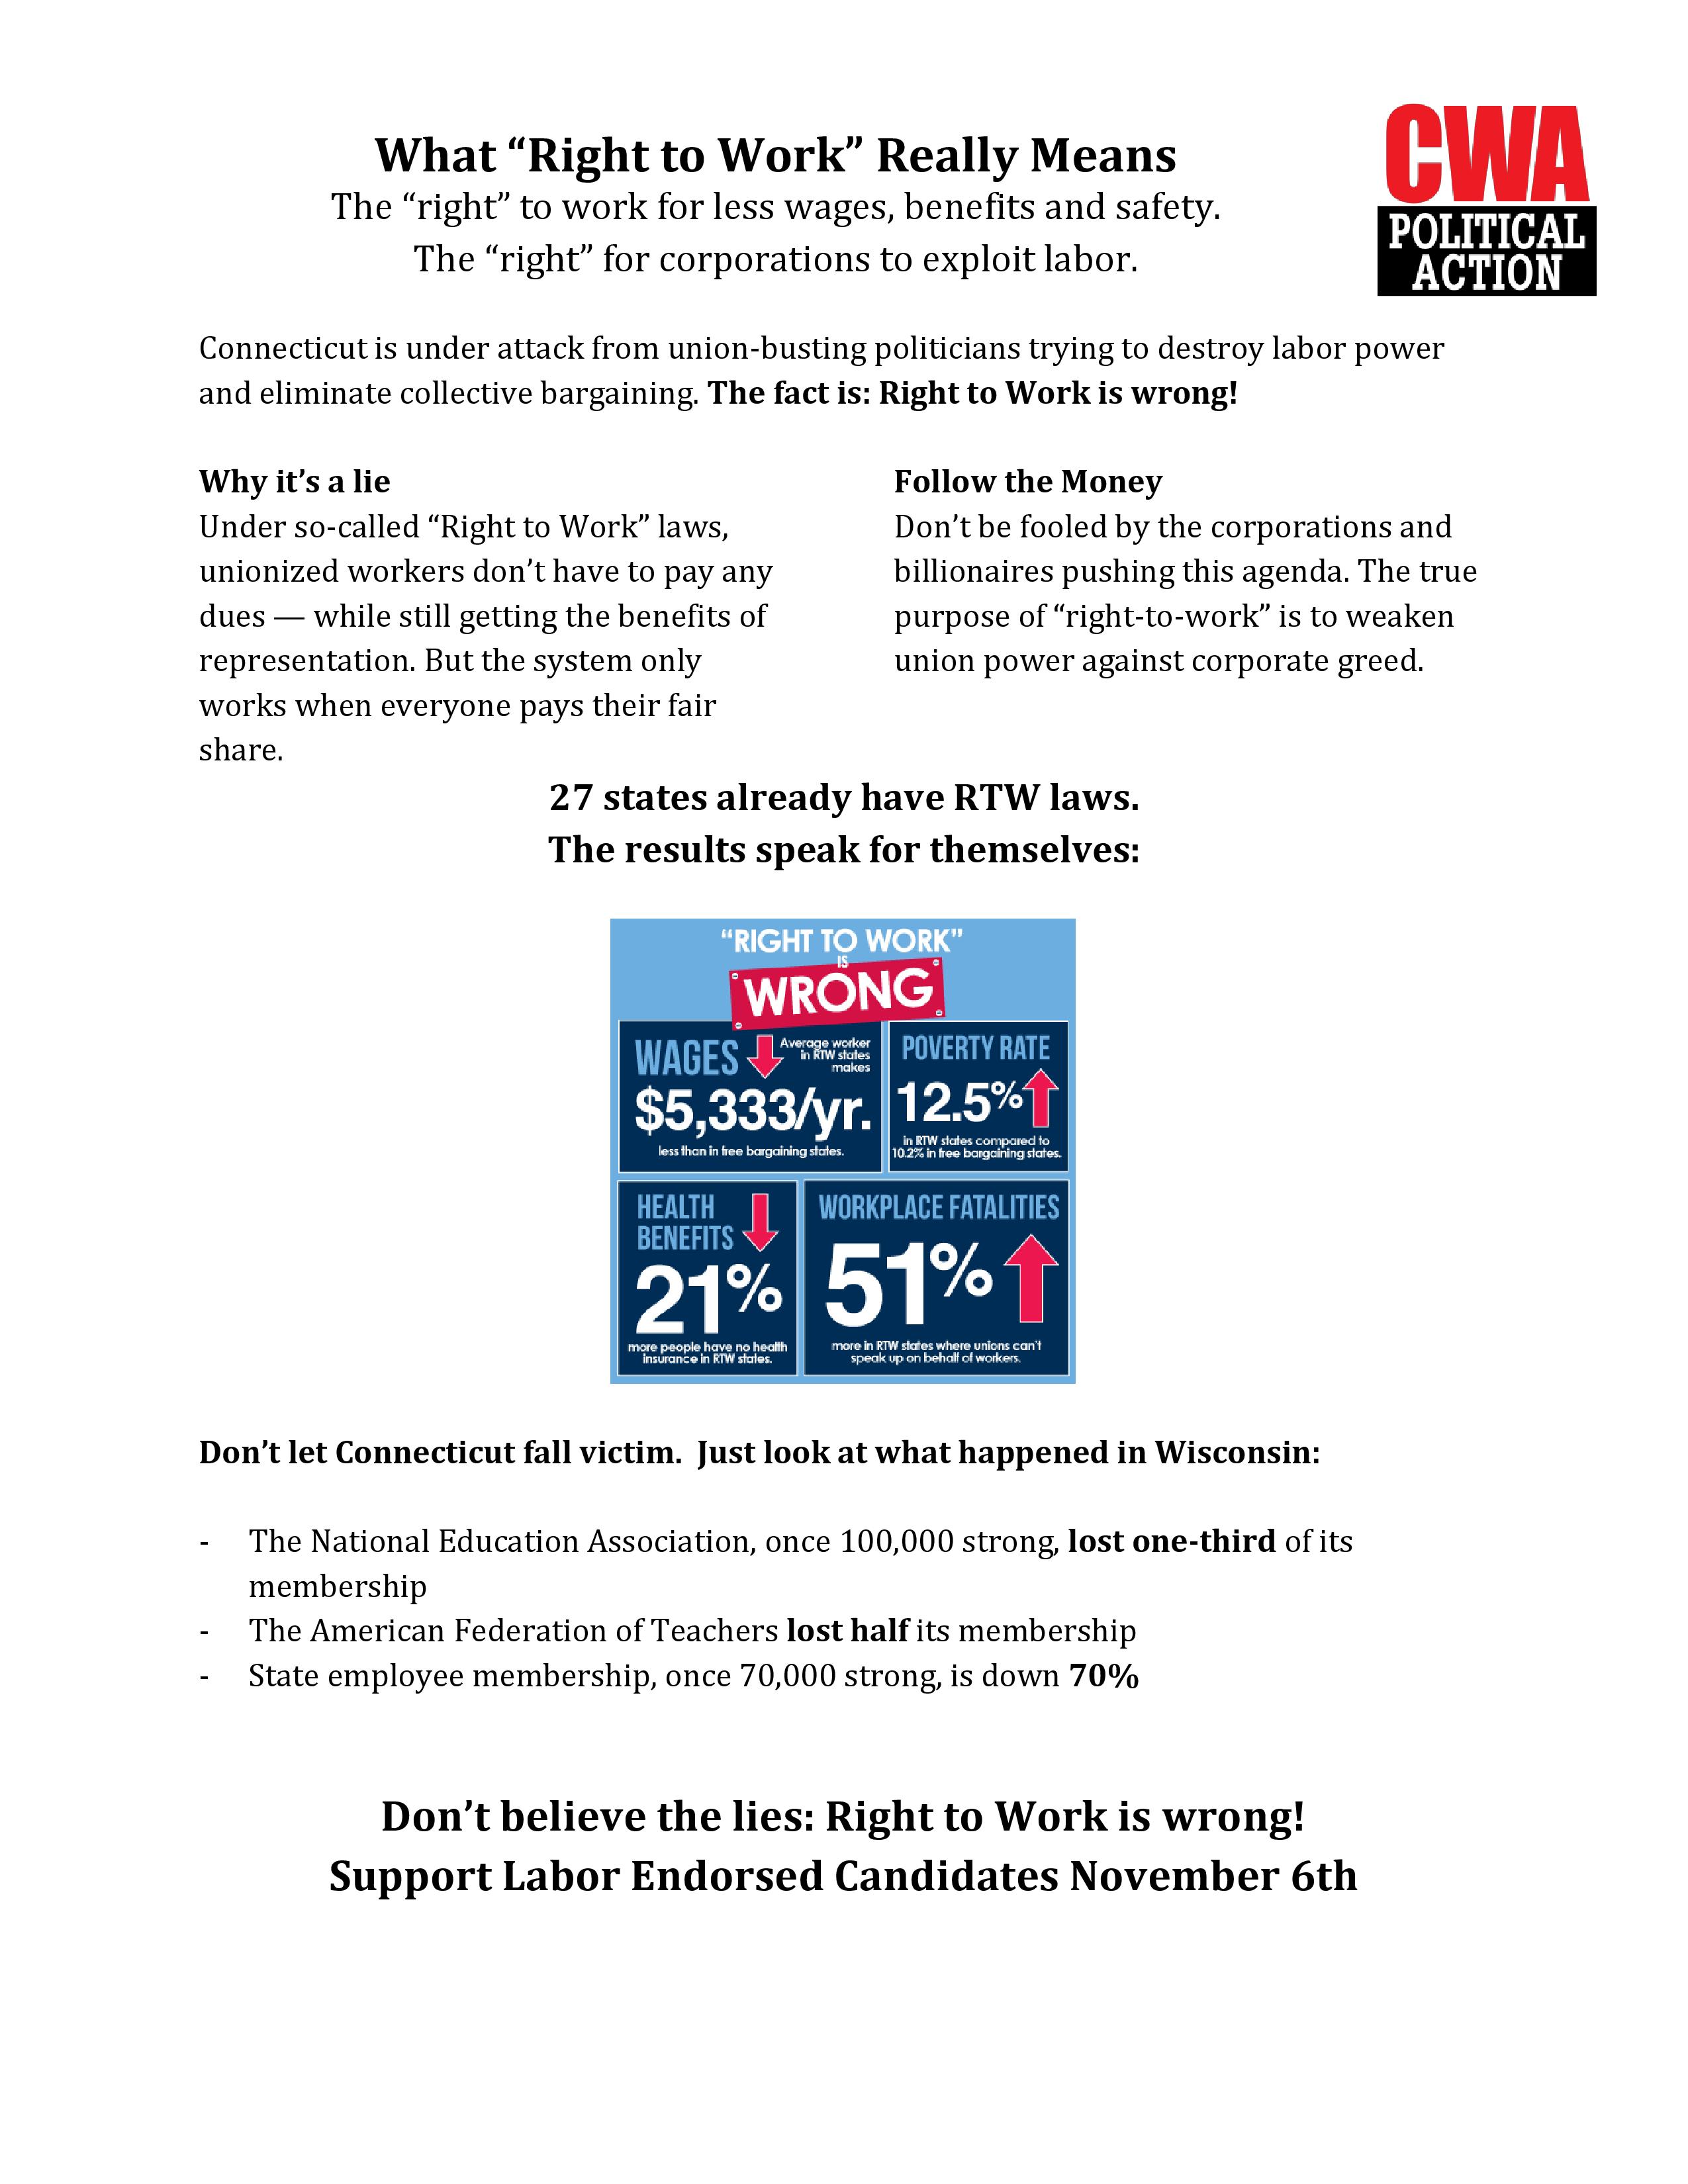 Right to work flyer